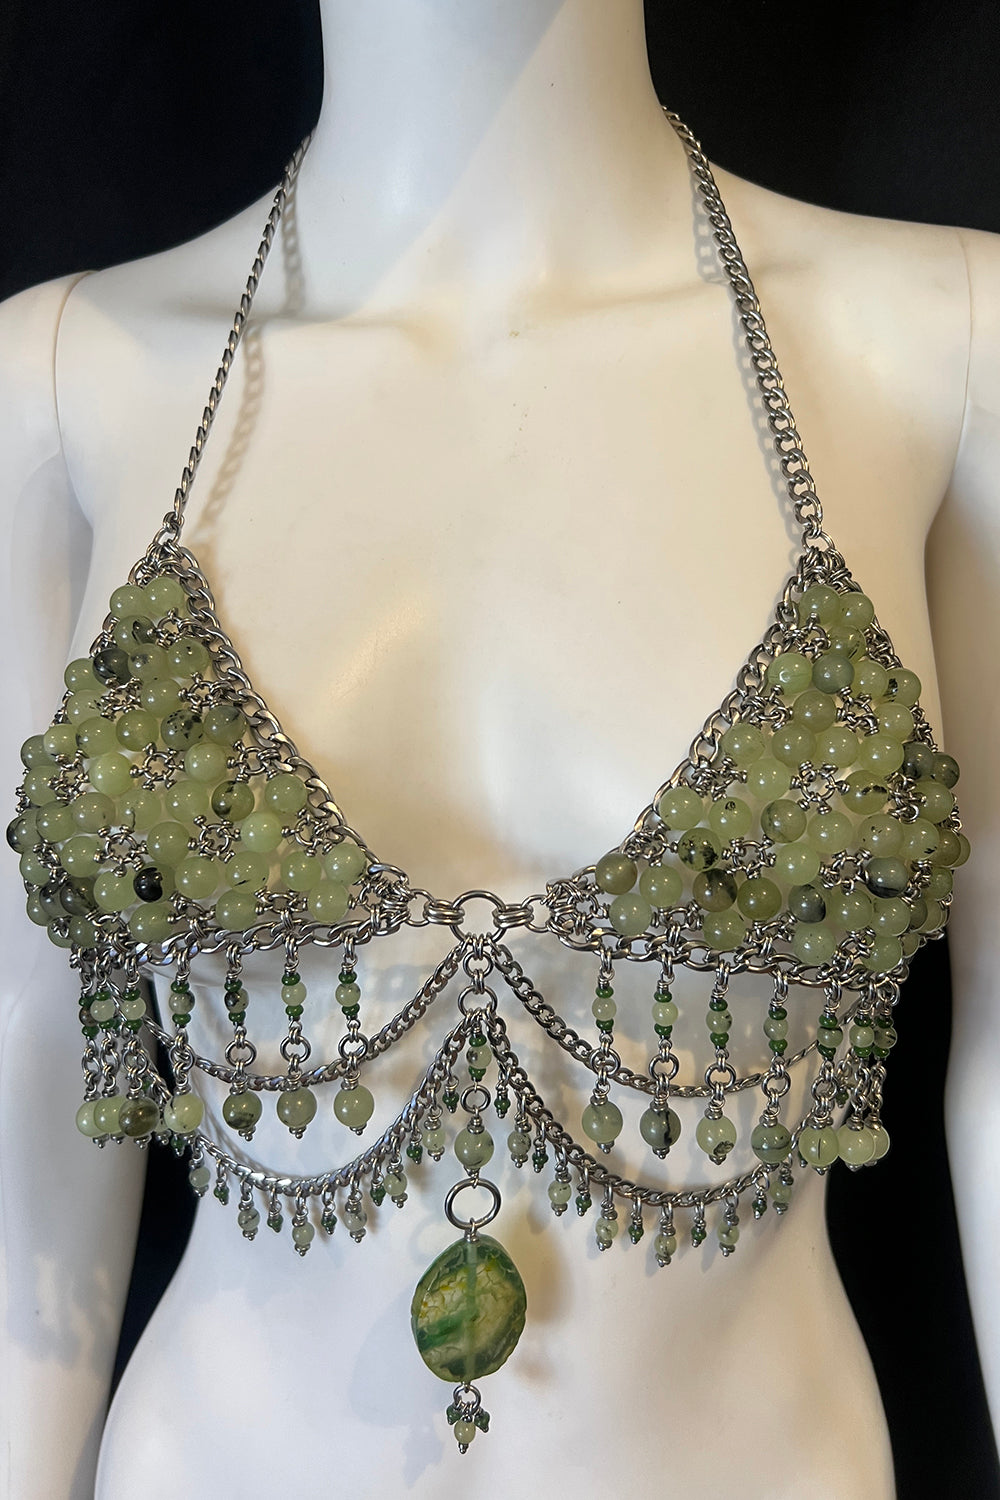 The Crystal Bra – Chained By Sedona